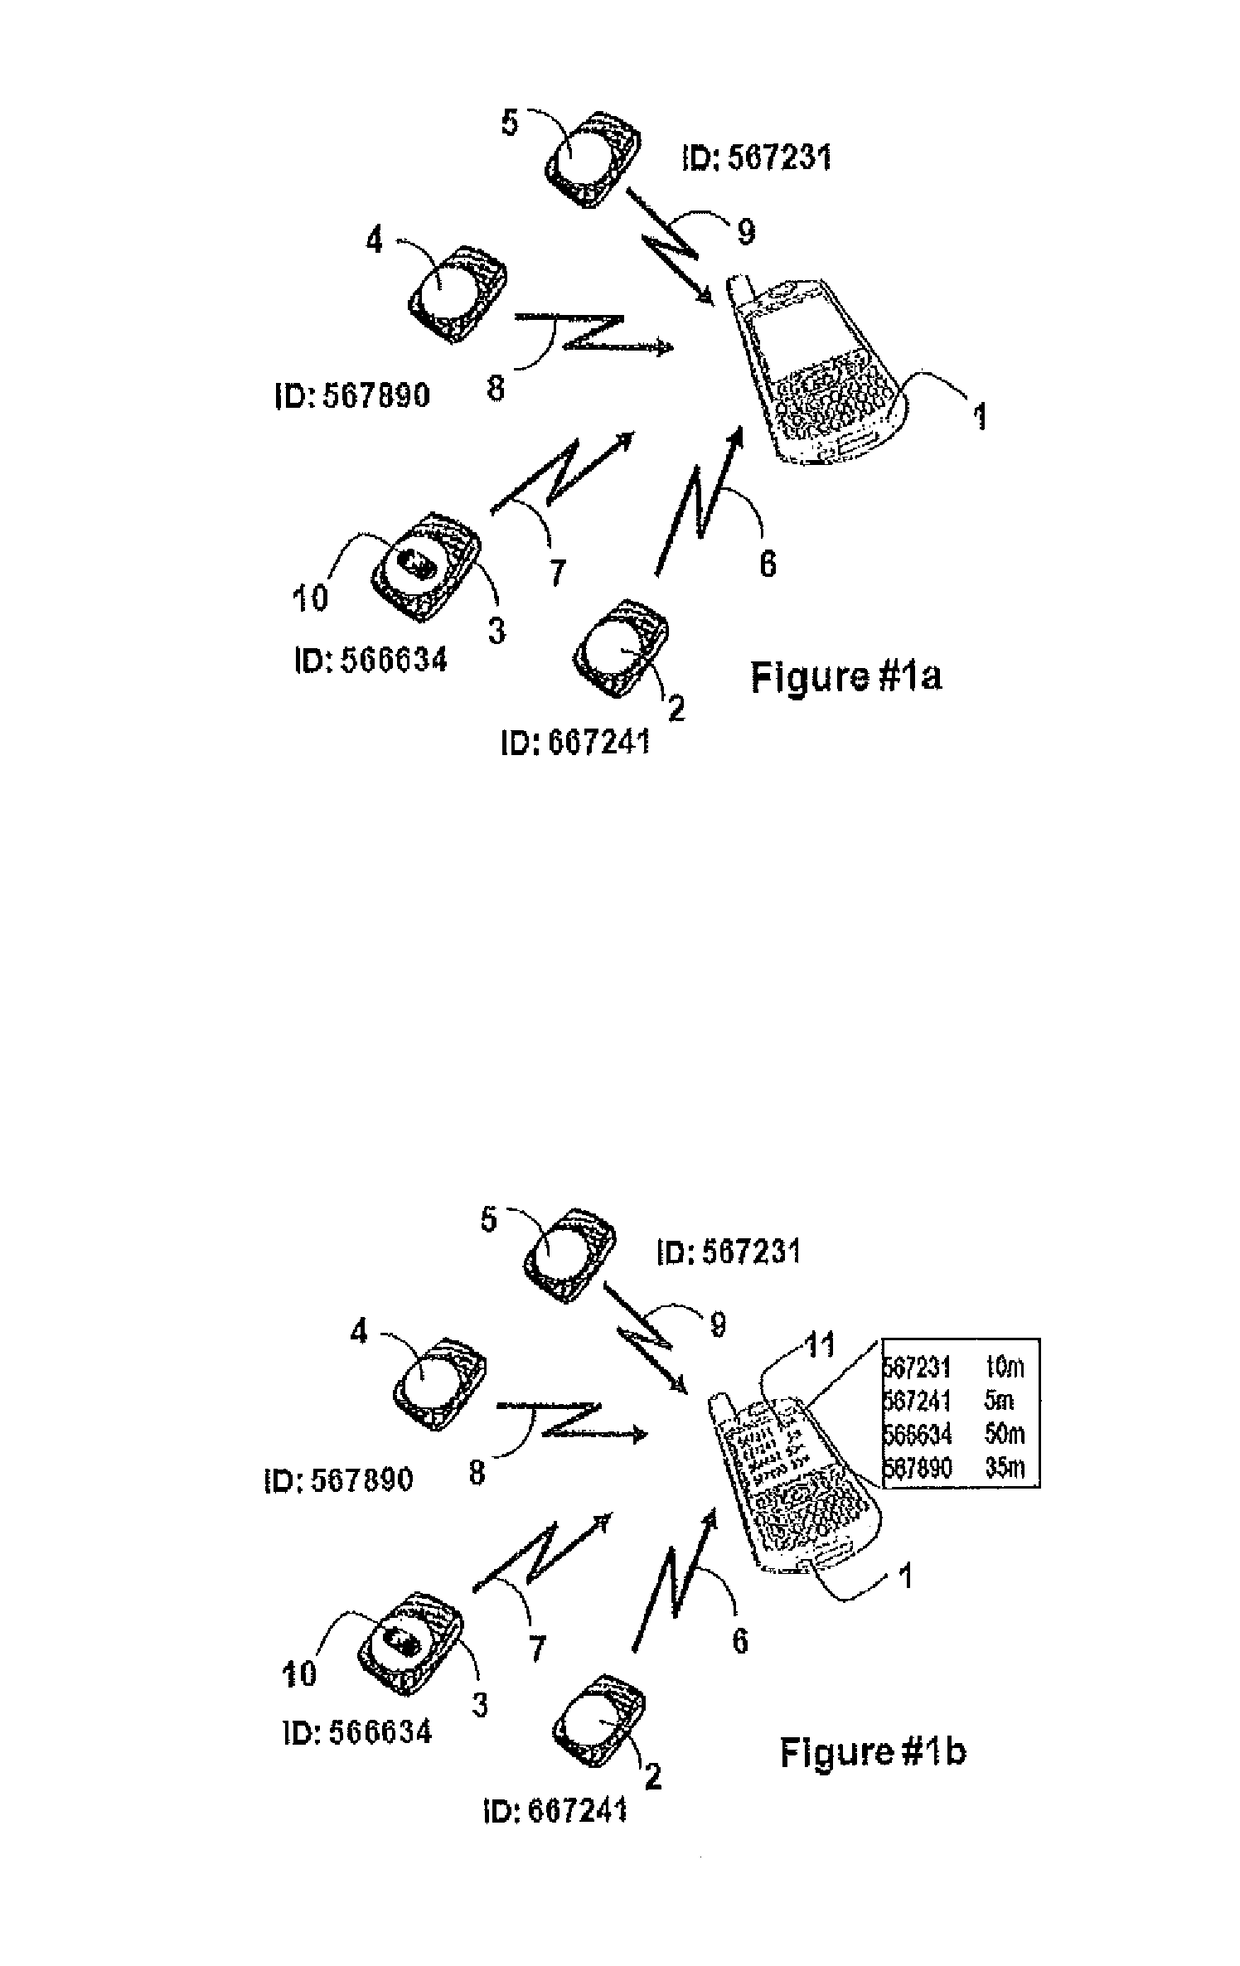 System and method for mobile monitoring of non-associated tags